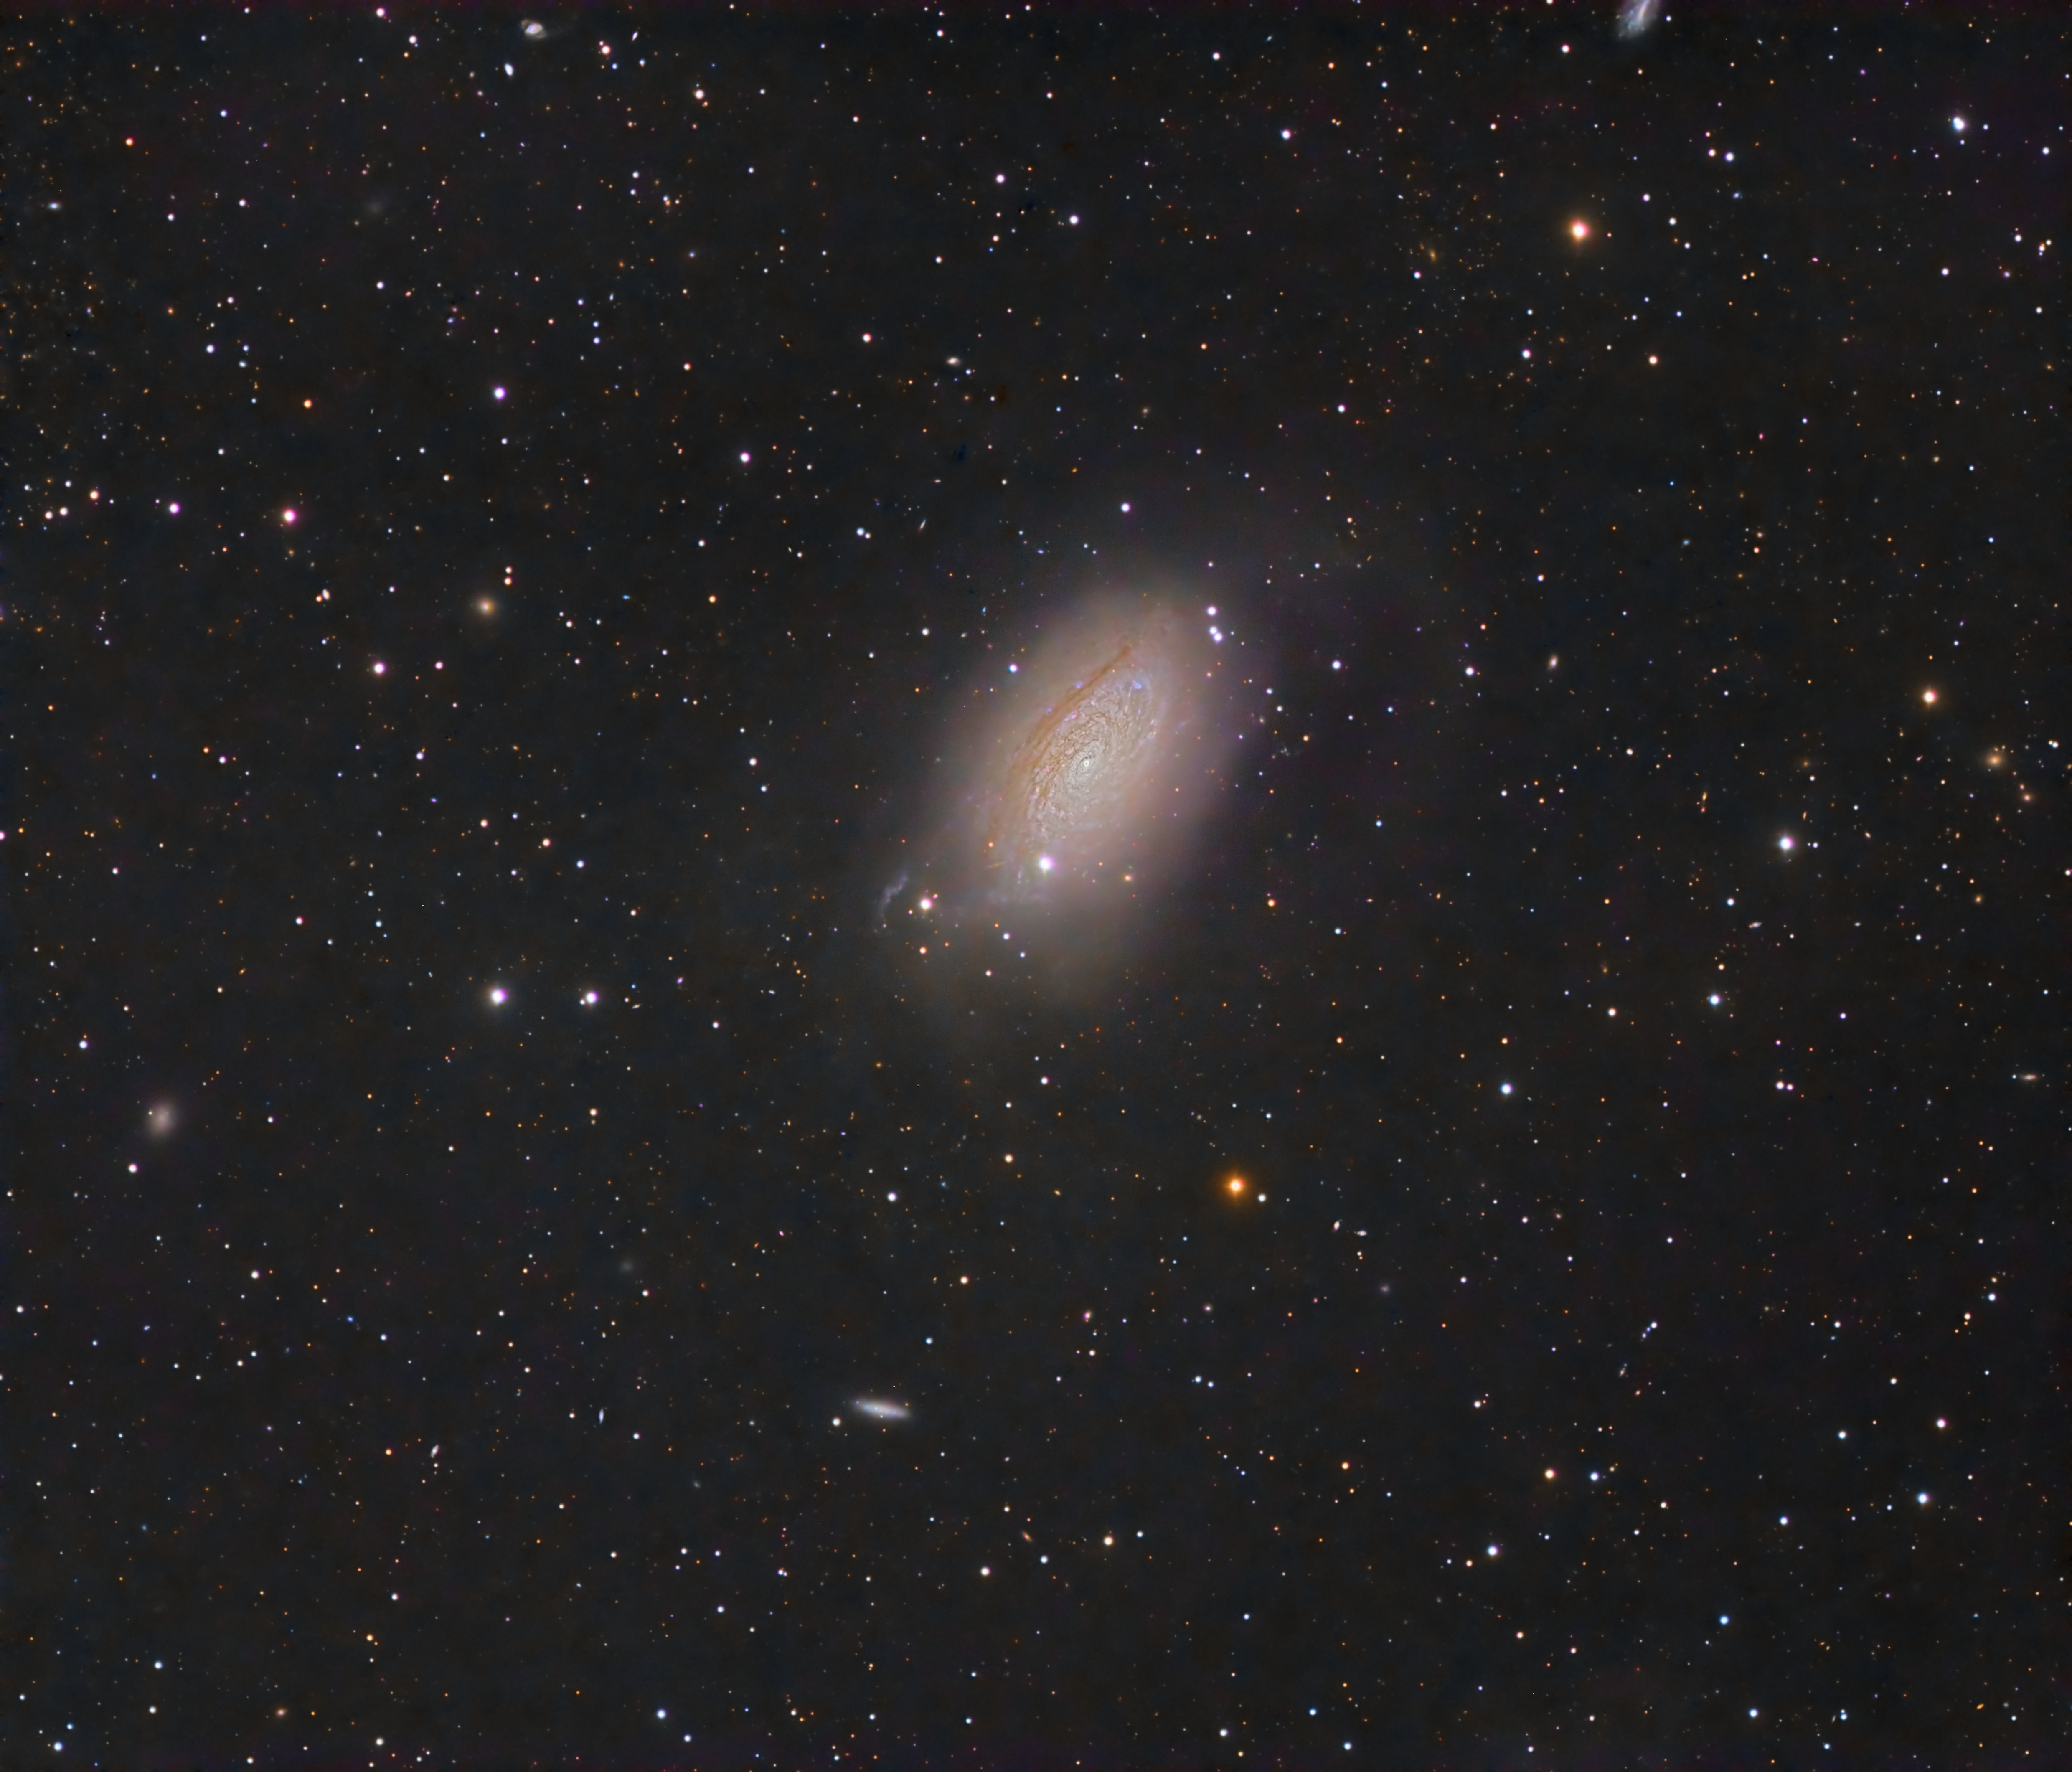 M63 (NGC 5055 Or The Sunflower Galaxy) reprocessing